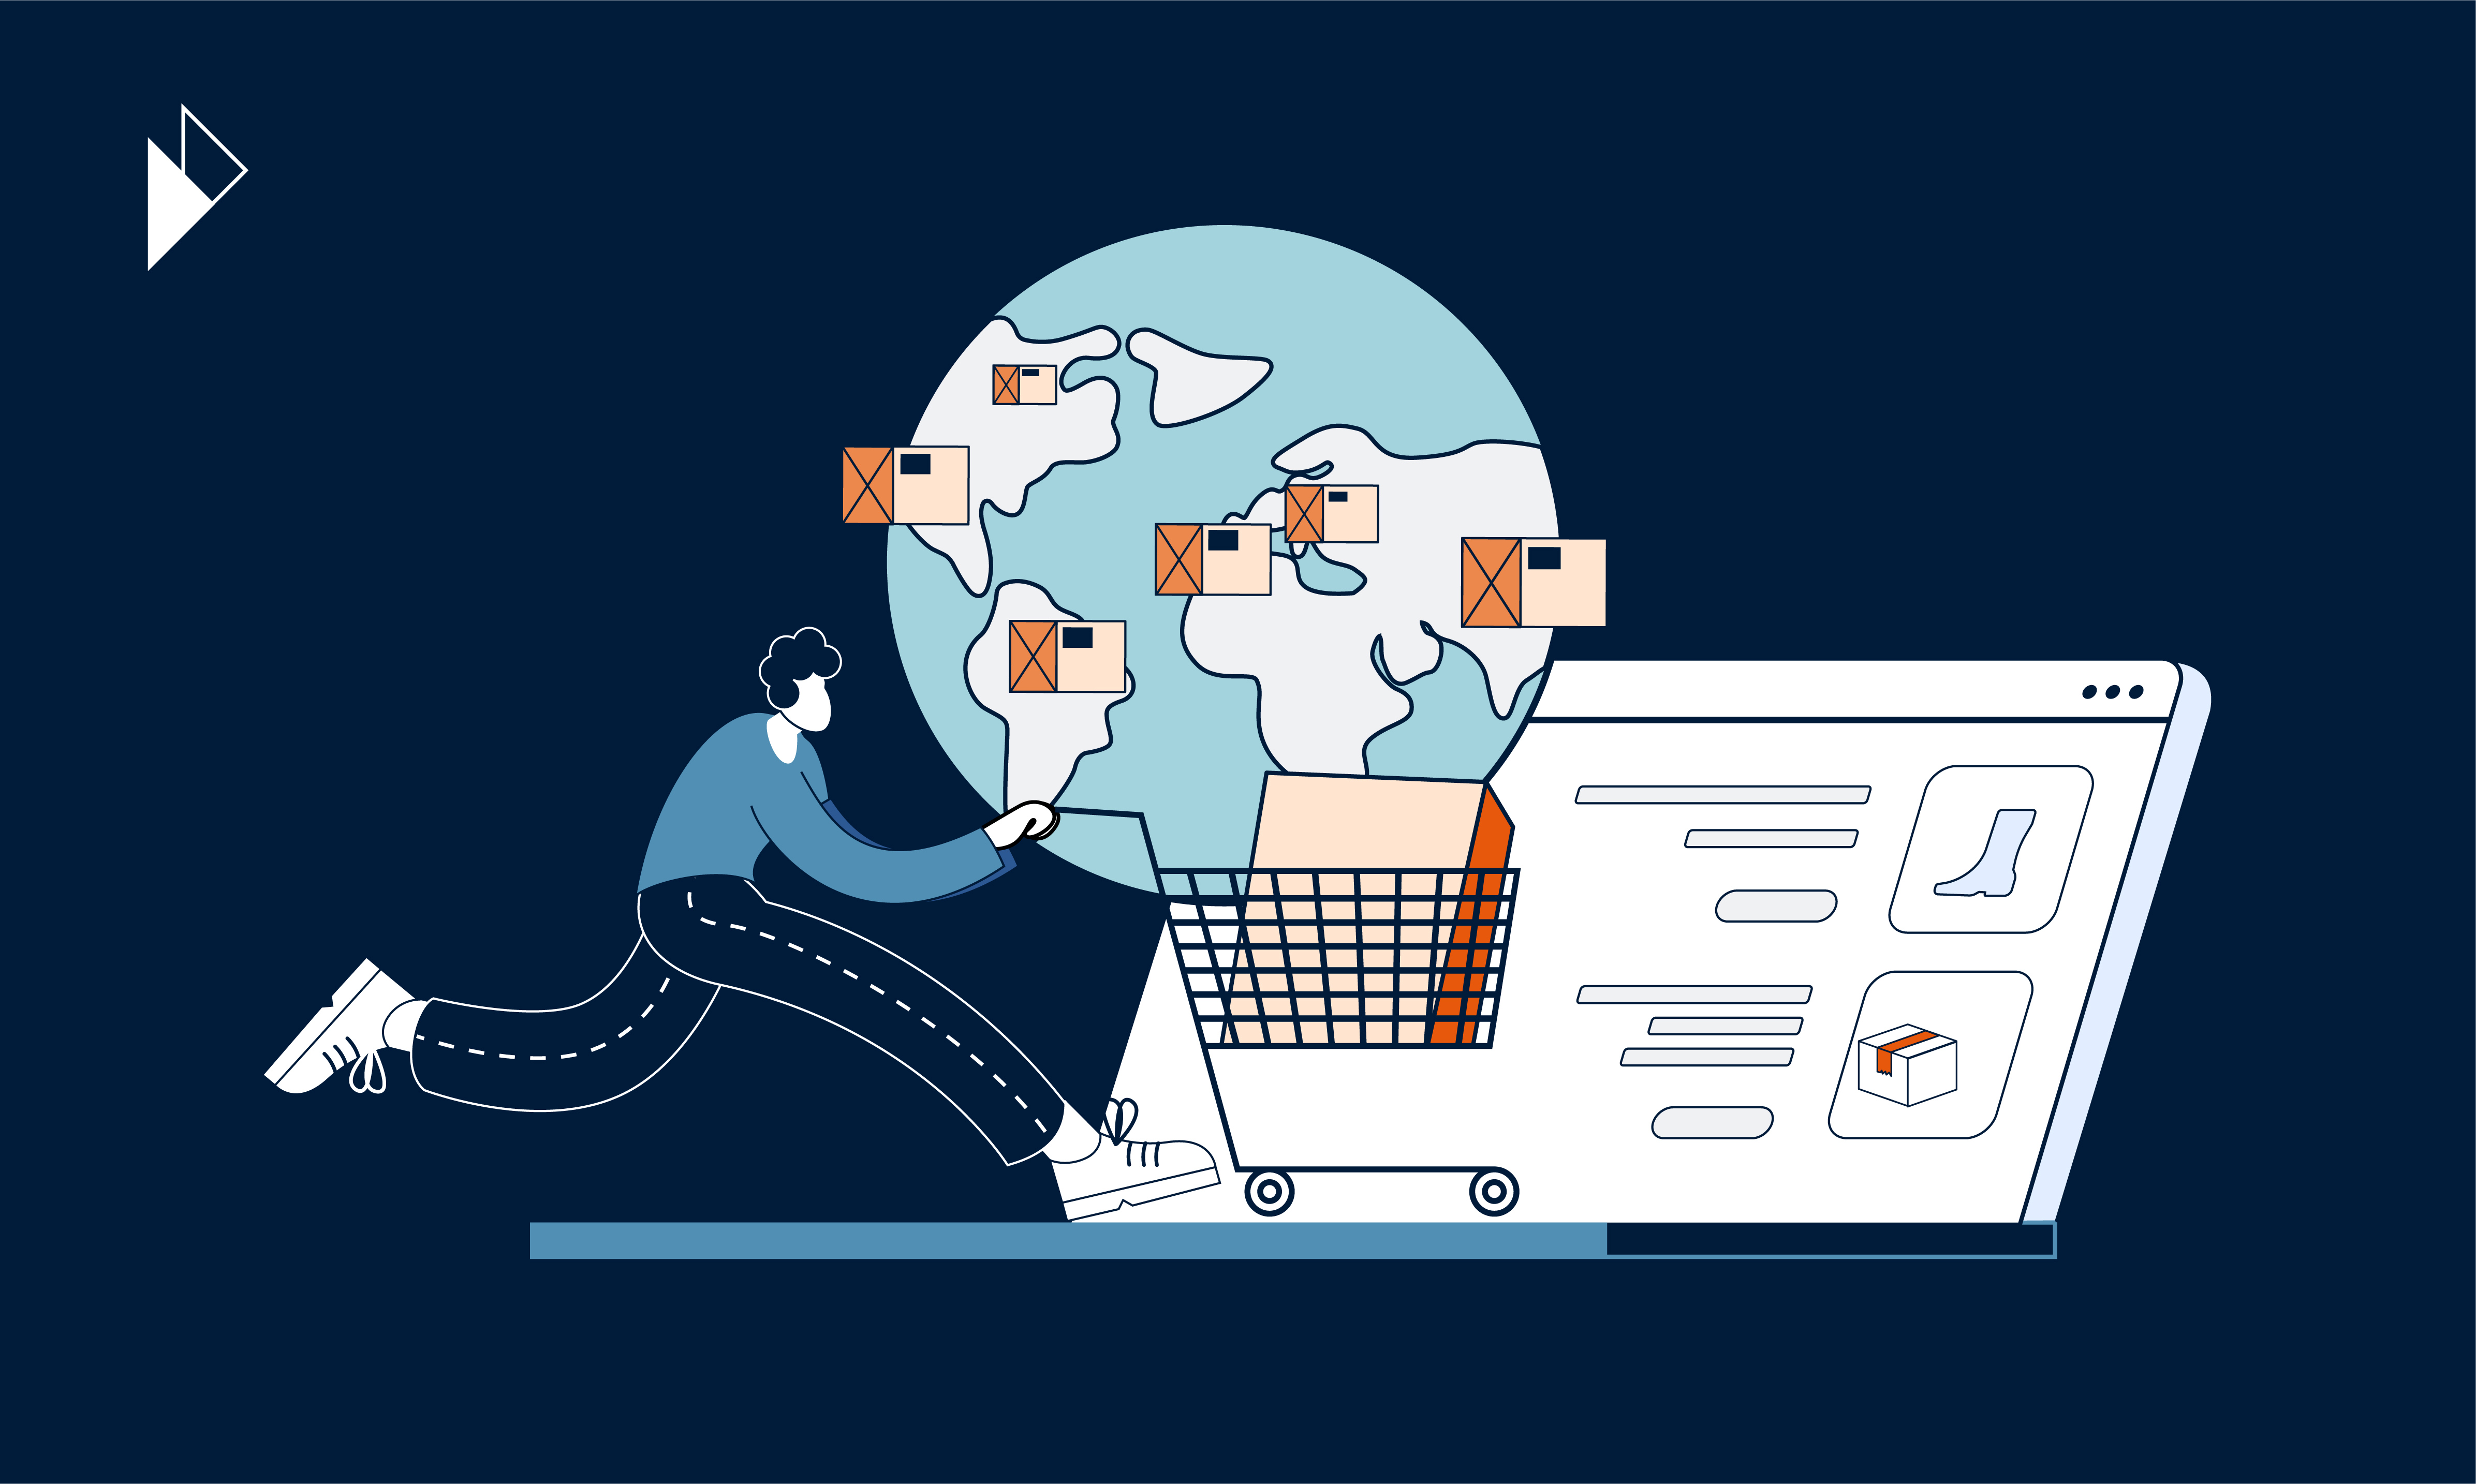 Three ways you can overcome cross-border e-commerce challenges